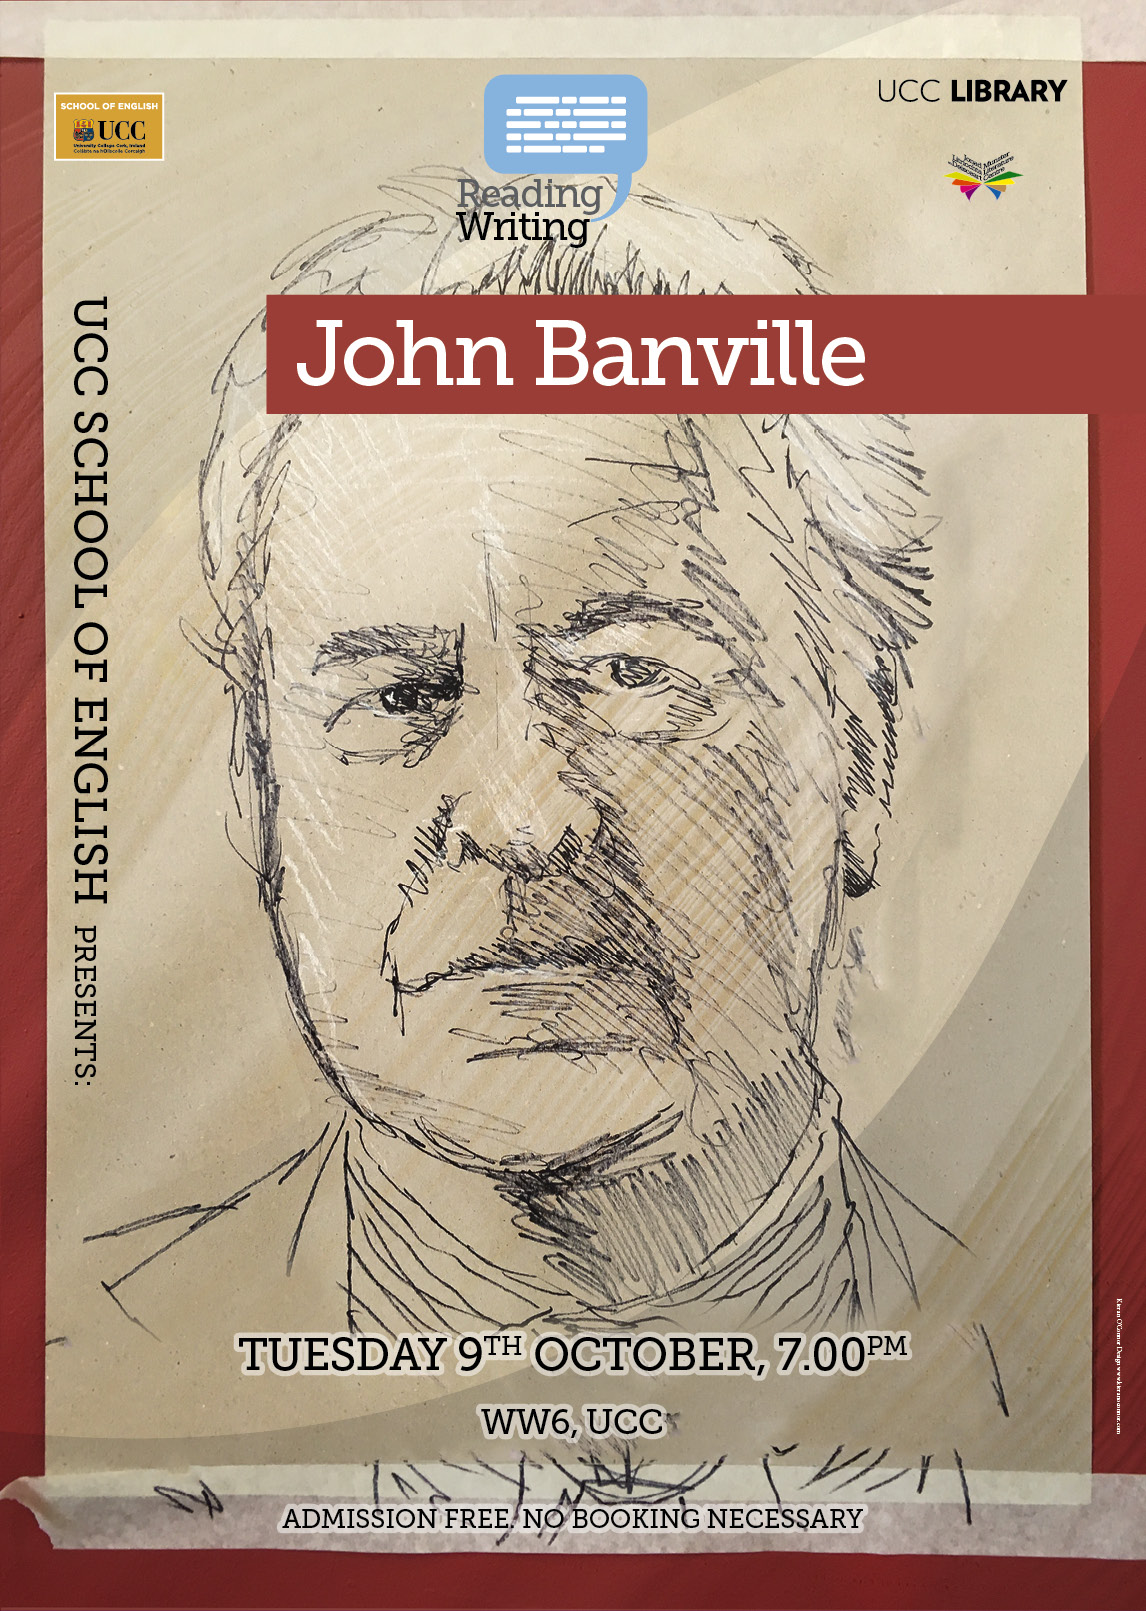 UCC’s 2018/19 School of English reading series kicks off on Tuesday, October 9, with one of Ireland’s leading novelists, John Banville.